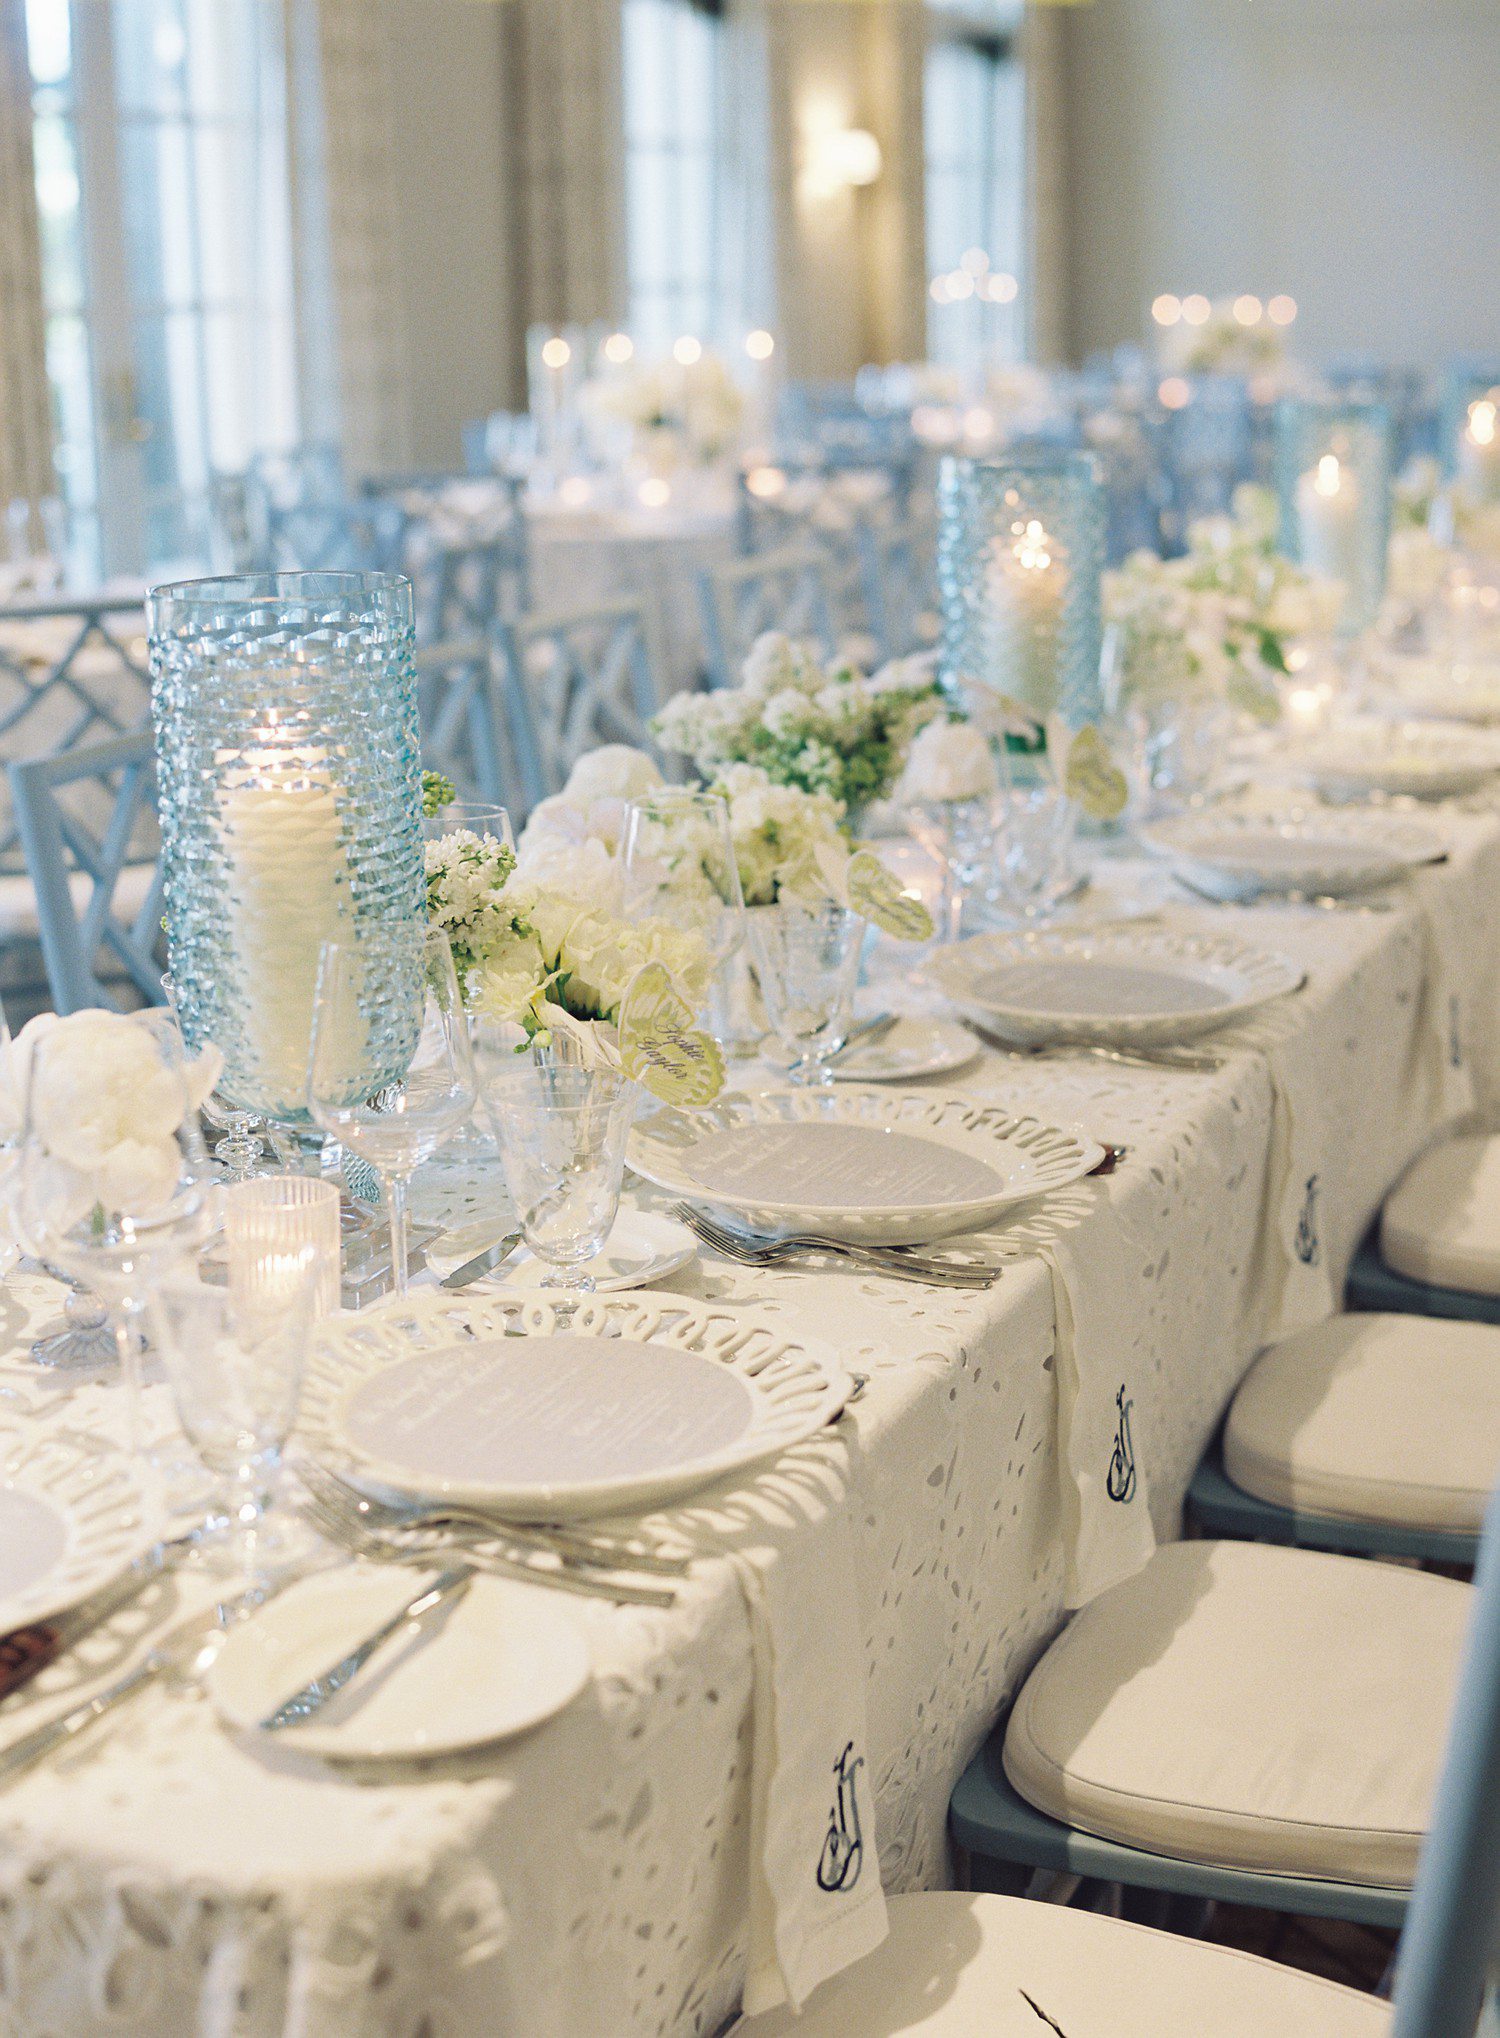 Wedding tablescape with light blue and white details.